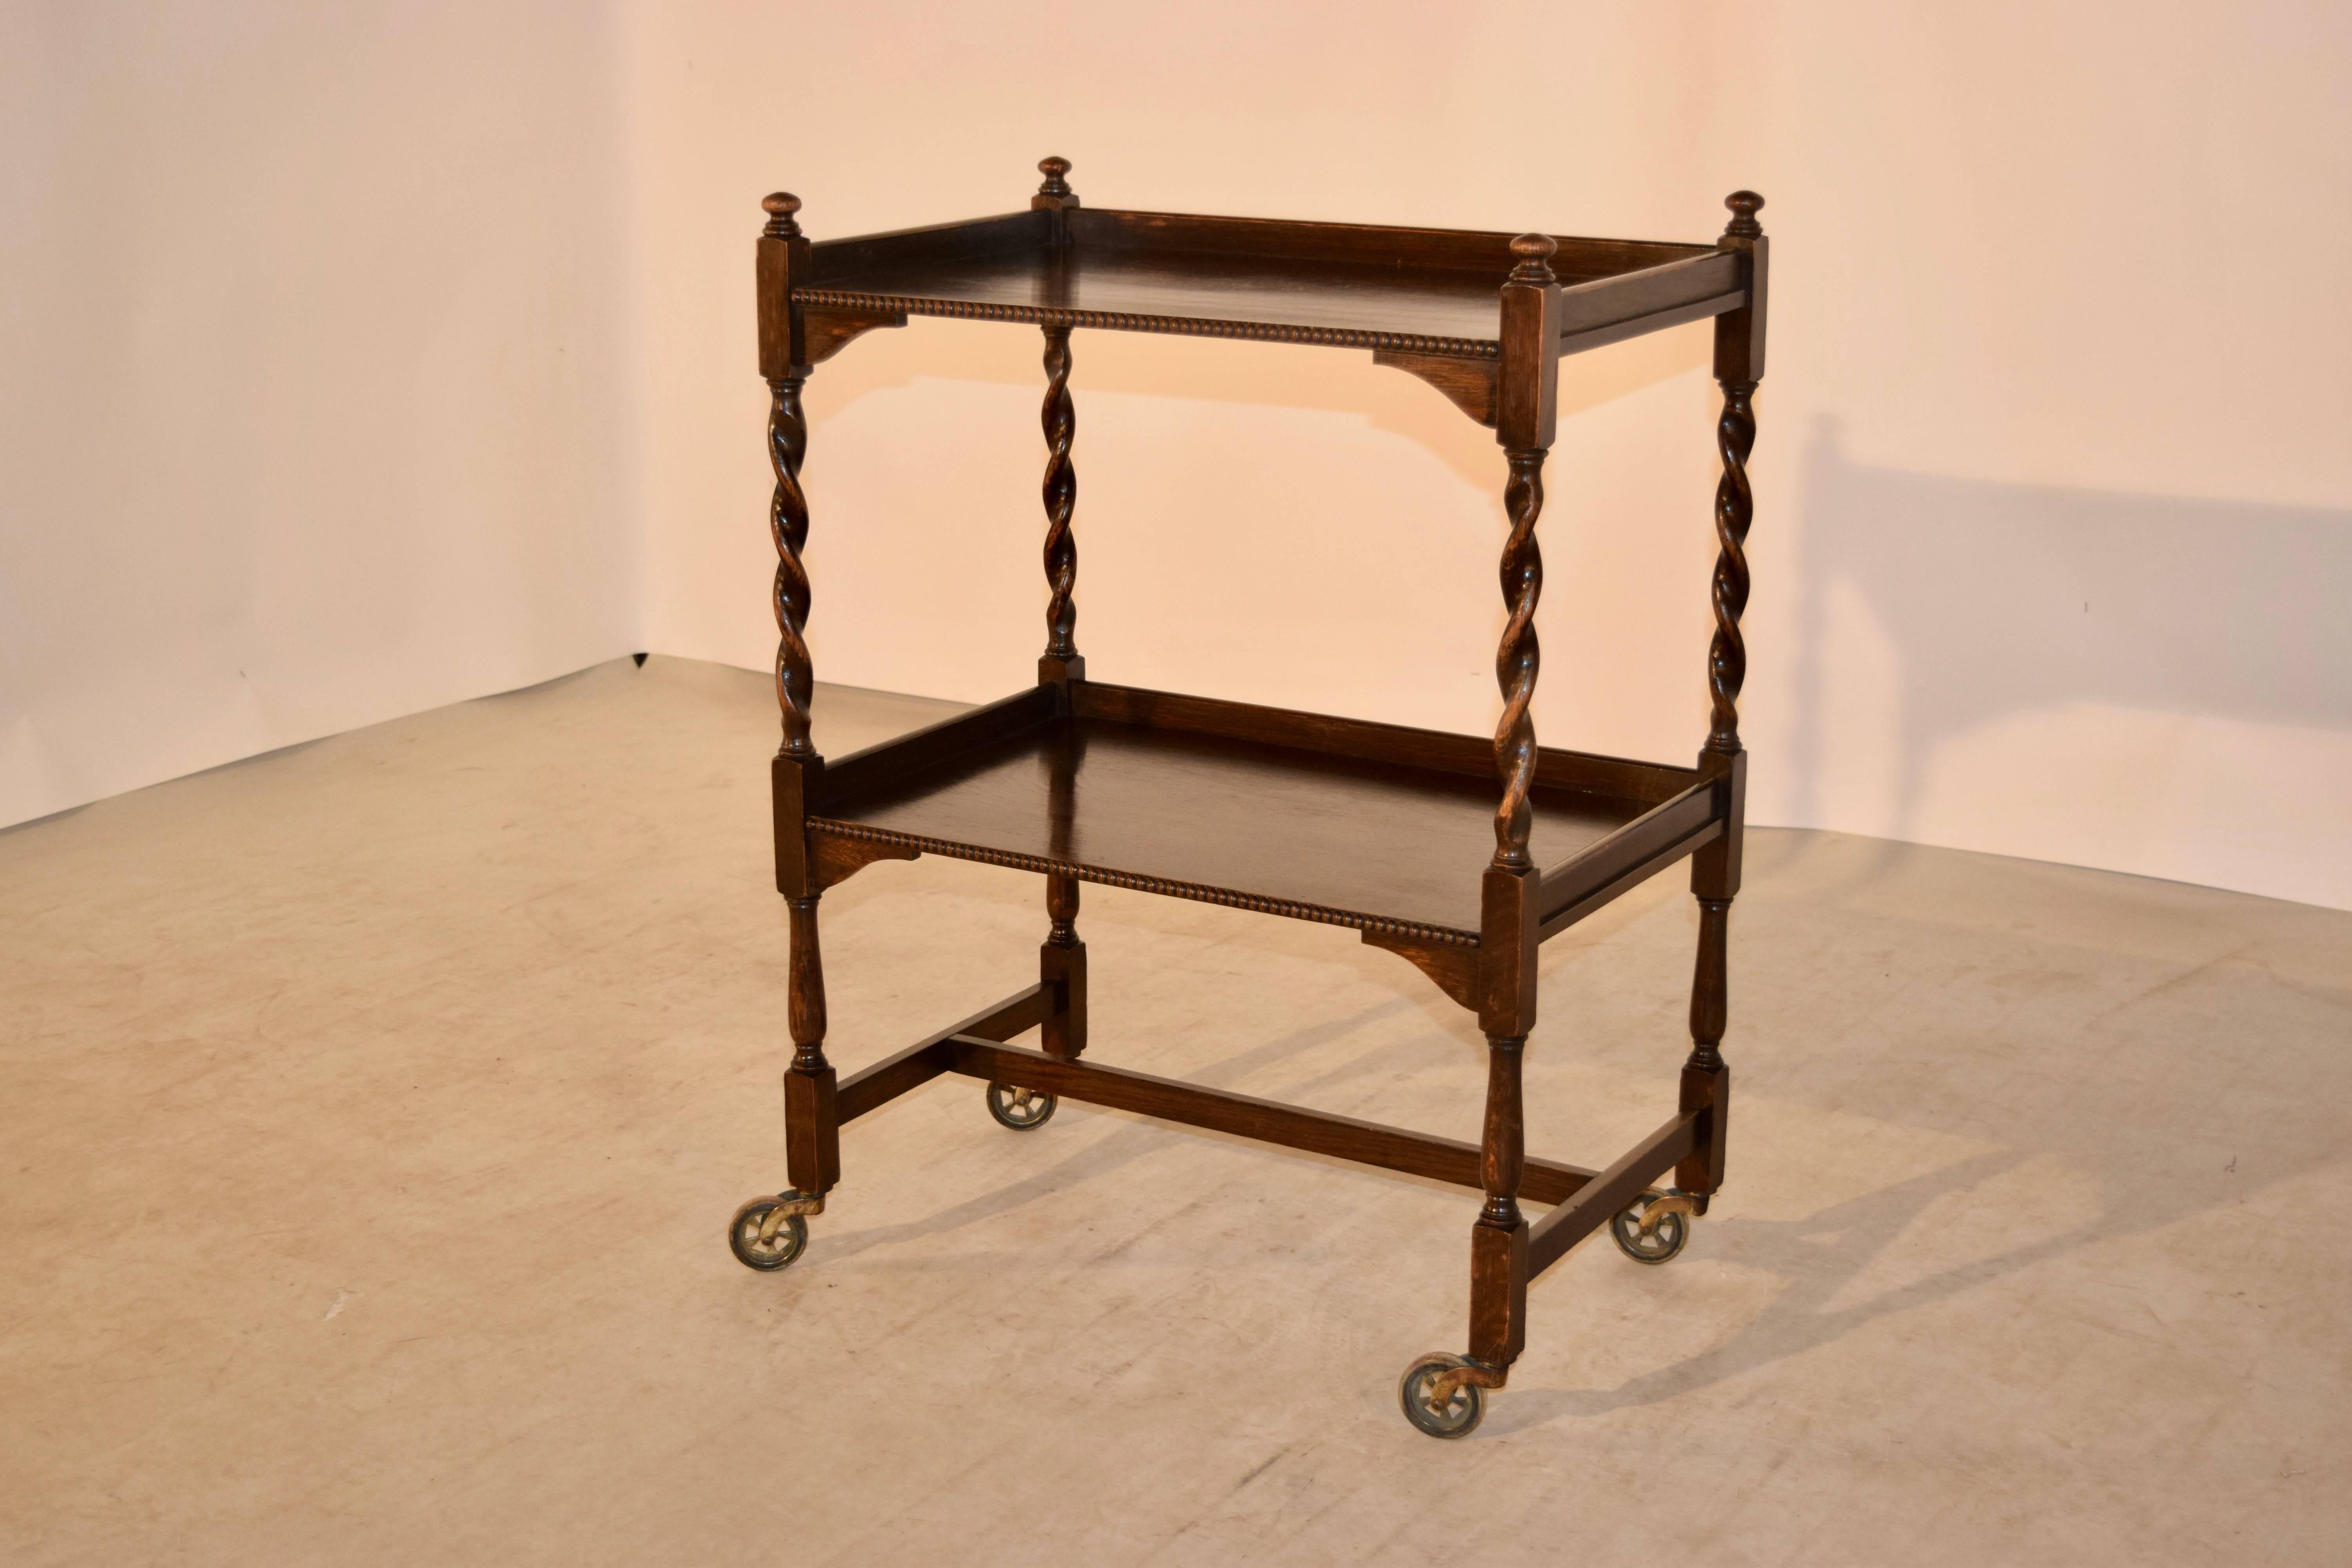 English drink cart made from oak, circa 1900. The top is decorated with finials, following down to two shelves, which have galleries around them and beaded fronts. The shelf supports are barley twist and have contrasting turned legs, joined by cross